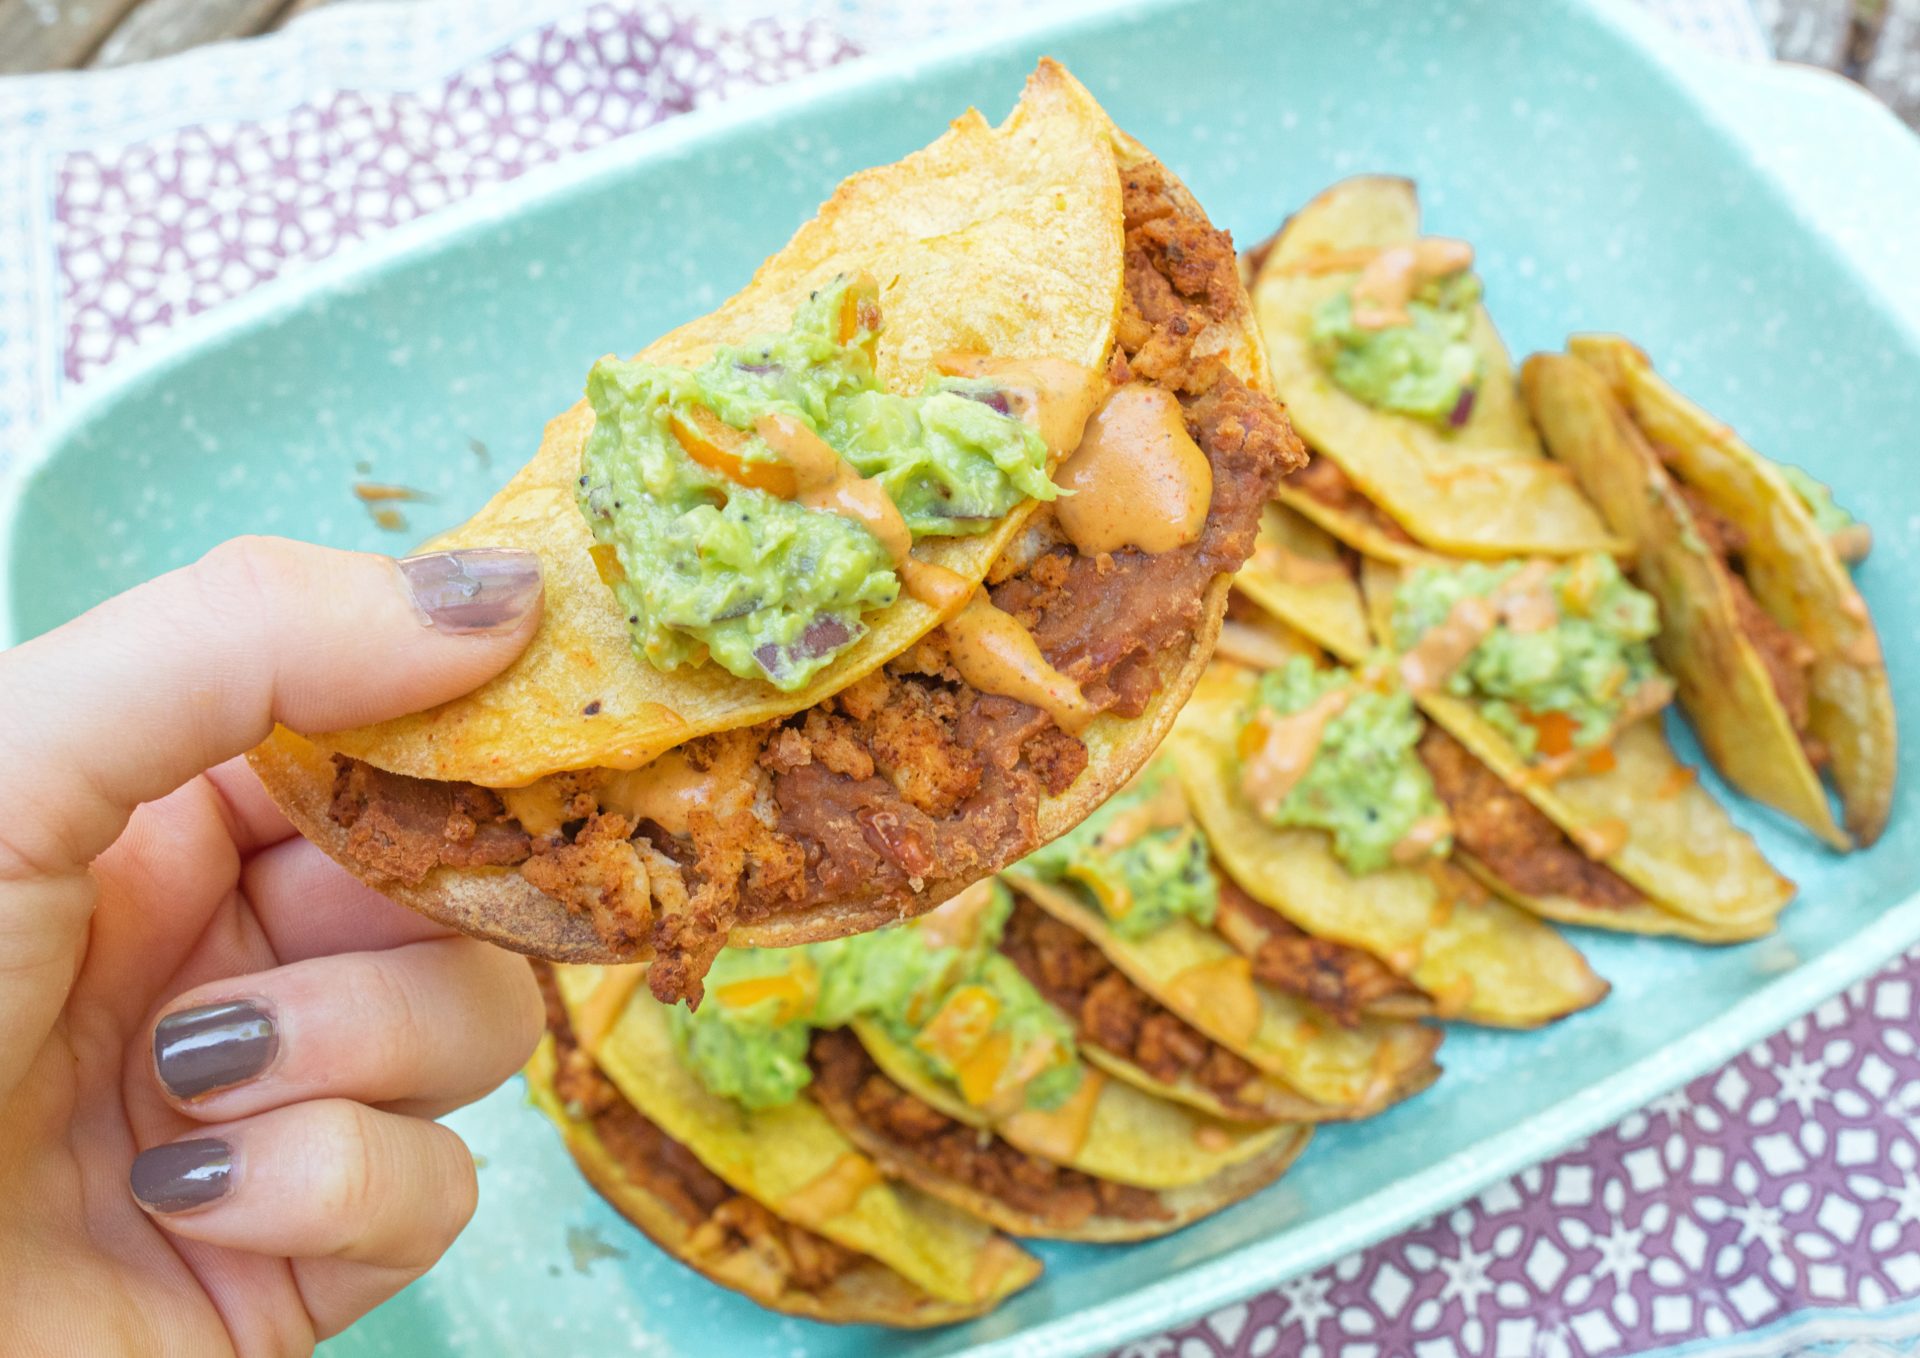 Gluten free, dairy free, guacamole, taco, tacos, taco night, corn tortilla tacos, chicken, beans, healthy, diet friendly, lighter, healthy cooking, recipe, dinner night, taco Tuesday